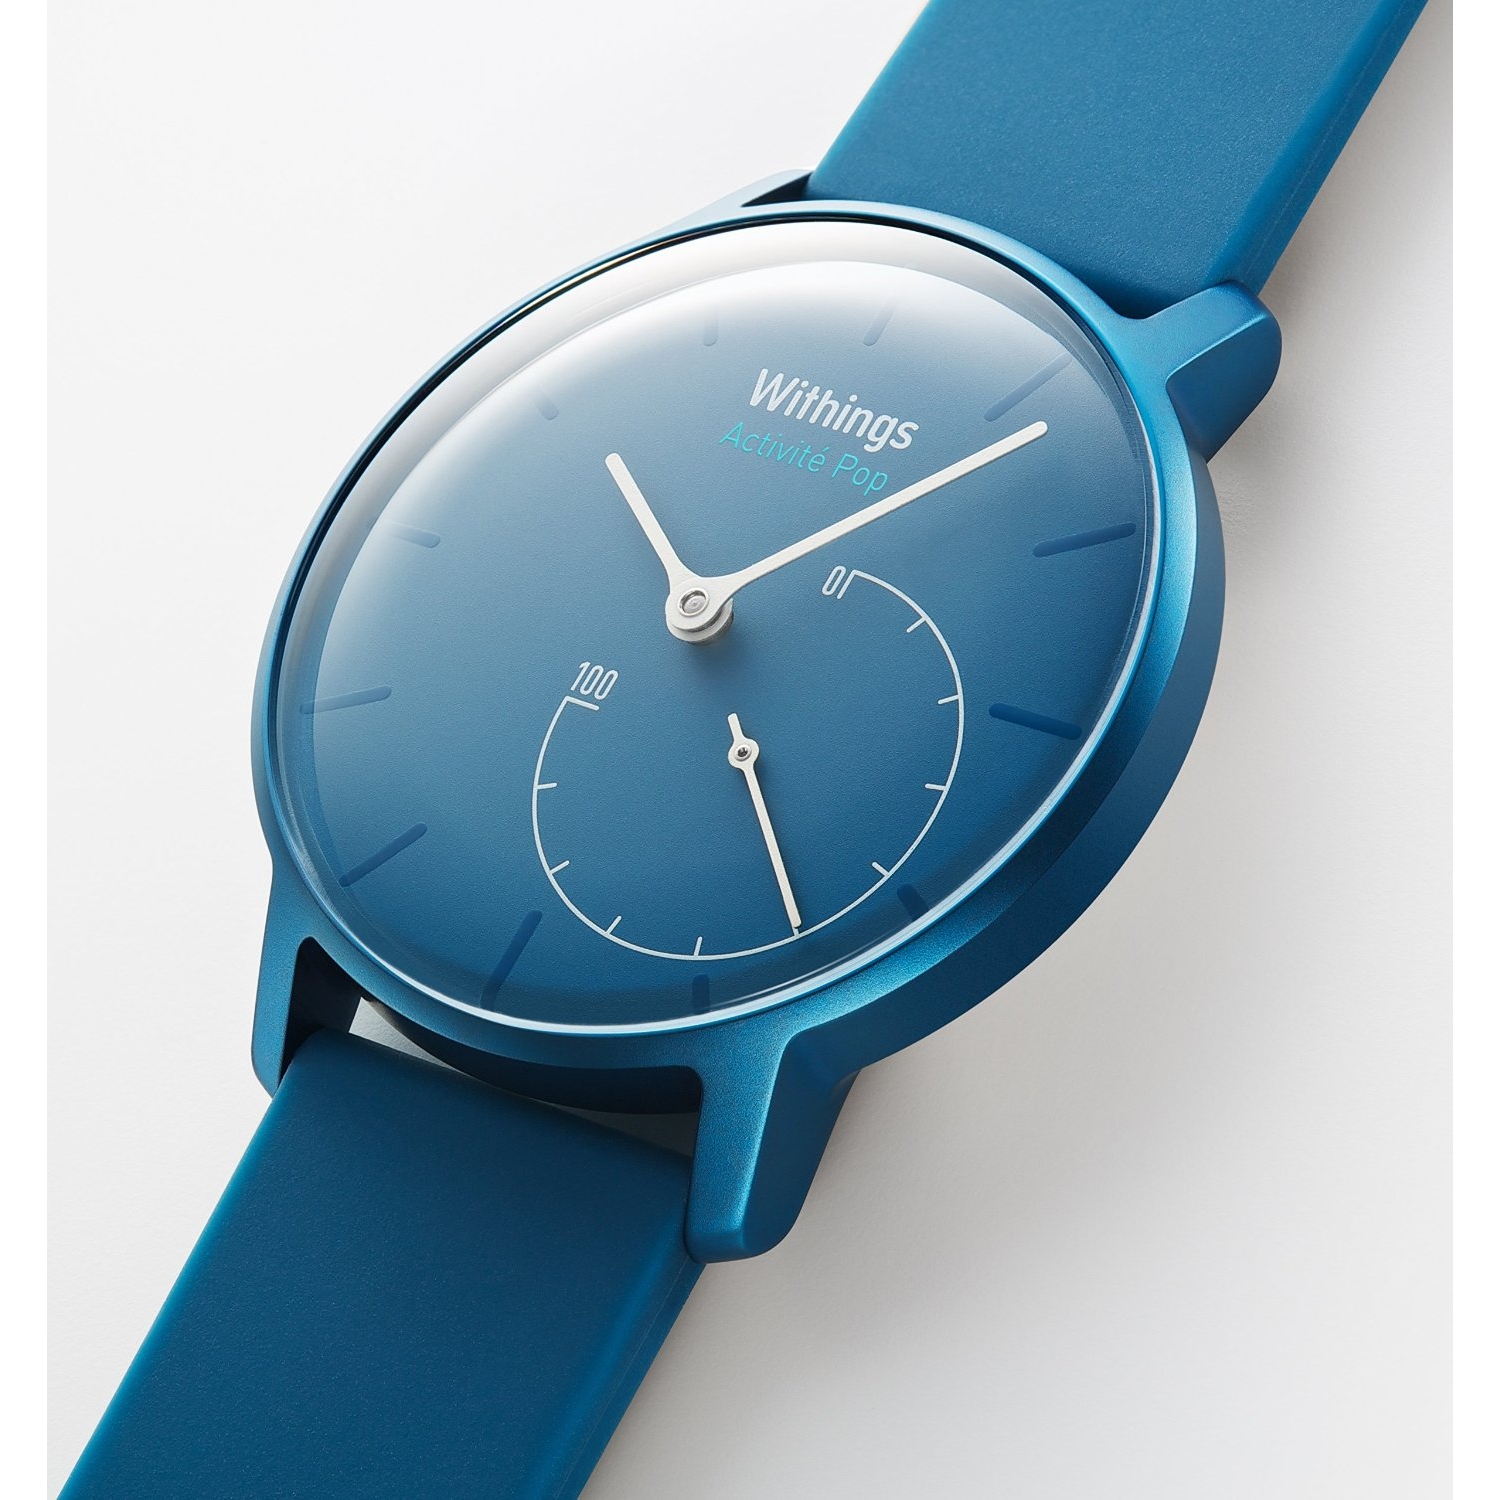 Pops watch. Часы Withings activity Pop. Часы Withings мужские. Withings синие. Buy Withings activite Sapphire.